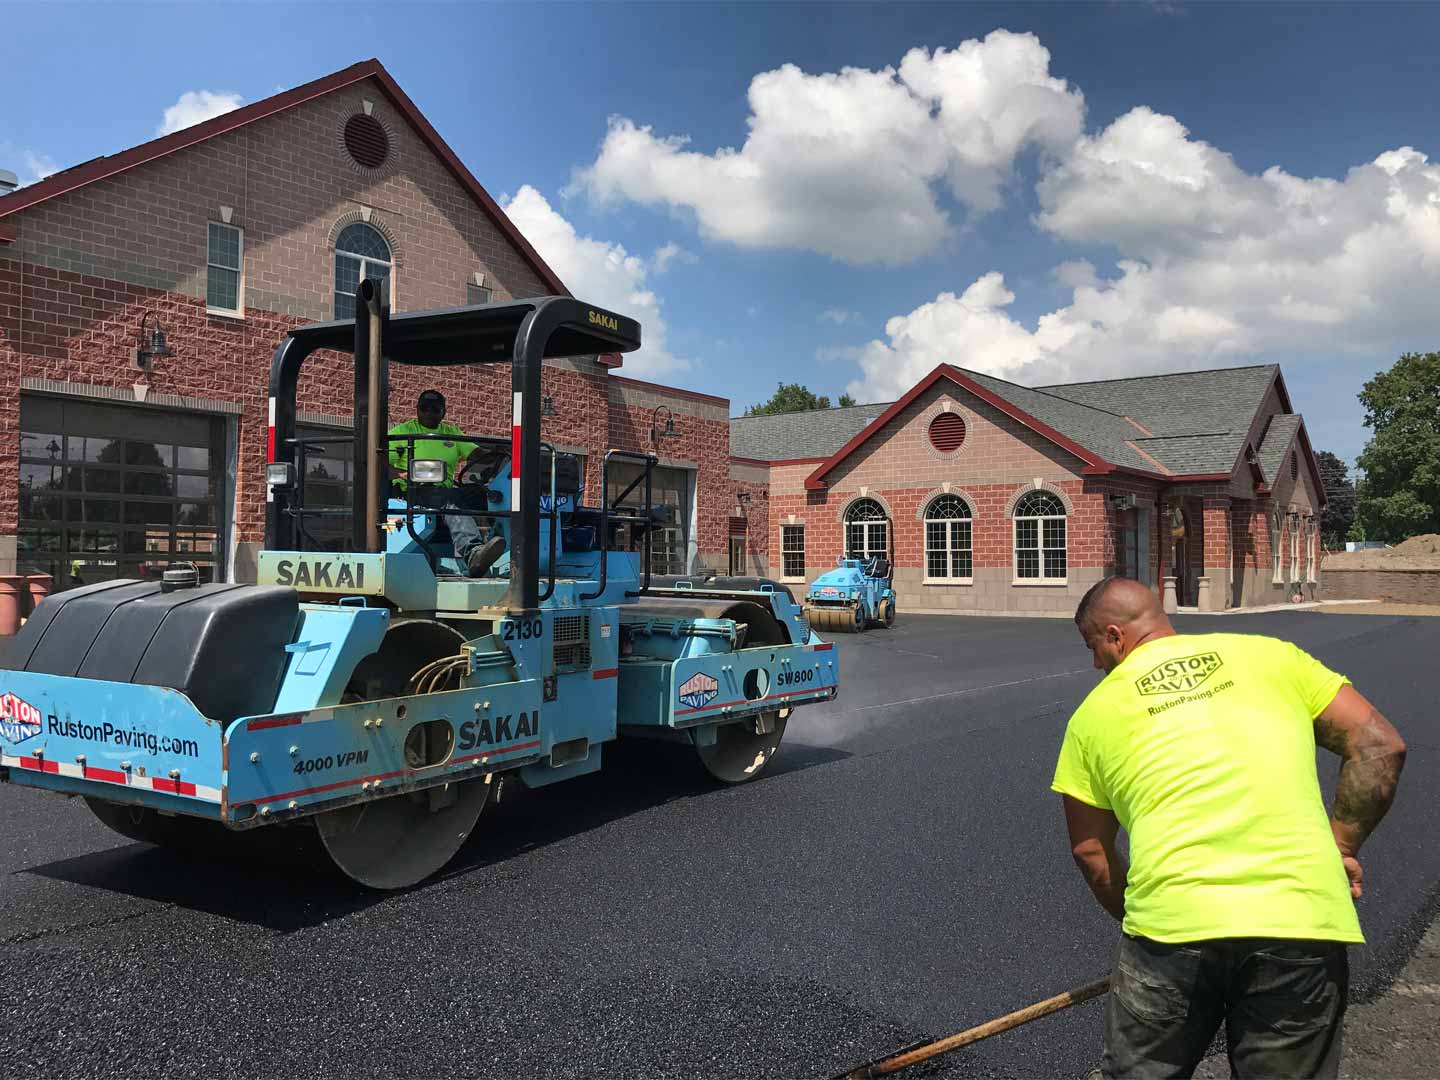 Fire Station Paving Project with roller and laborer